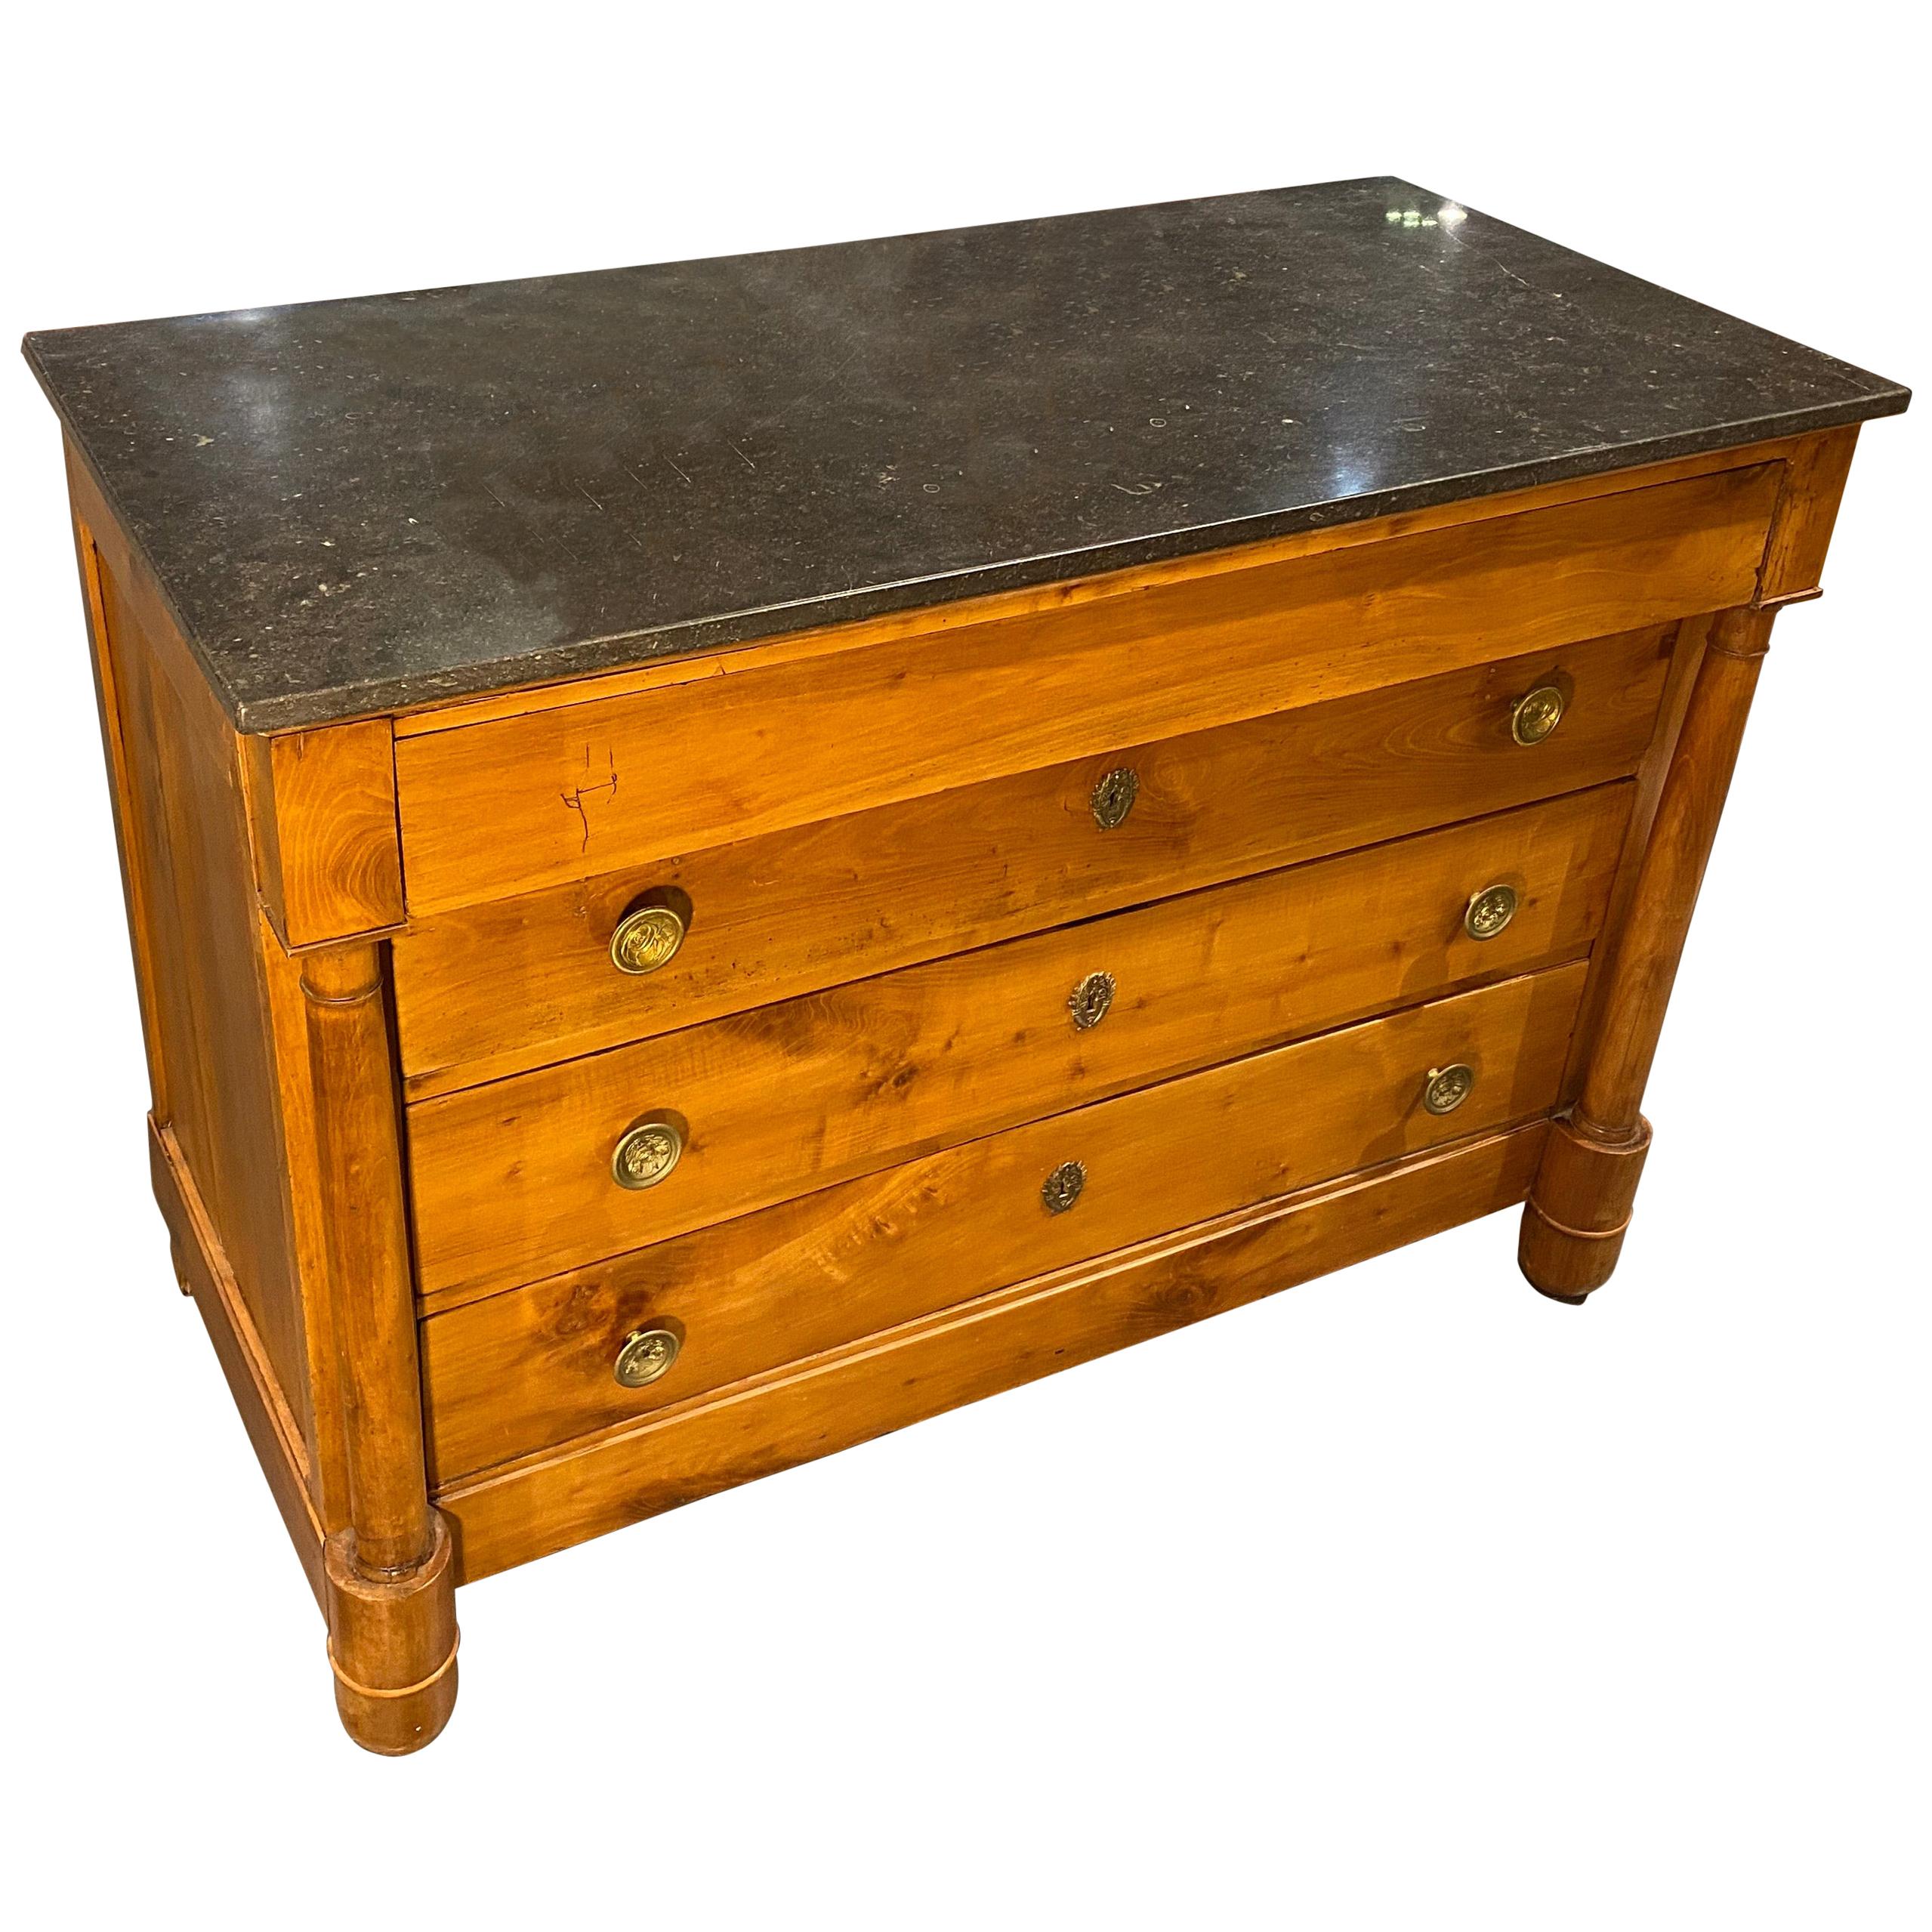 19th Century French Empire Marble-Top Cherry Commode